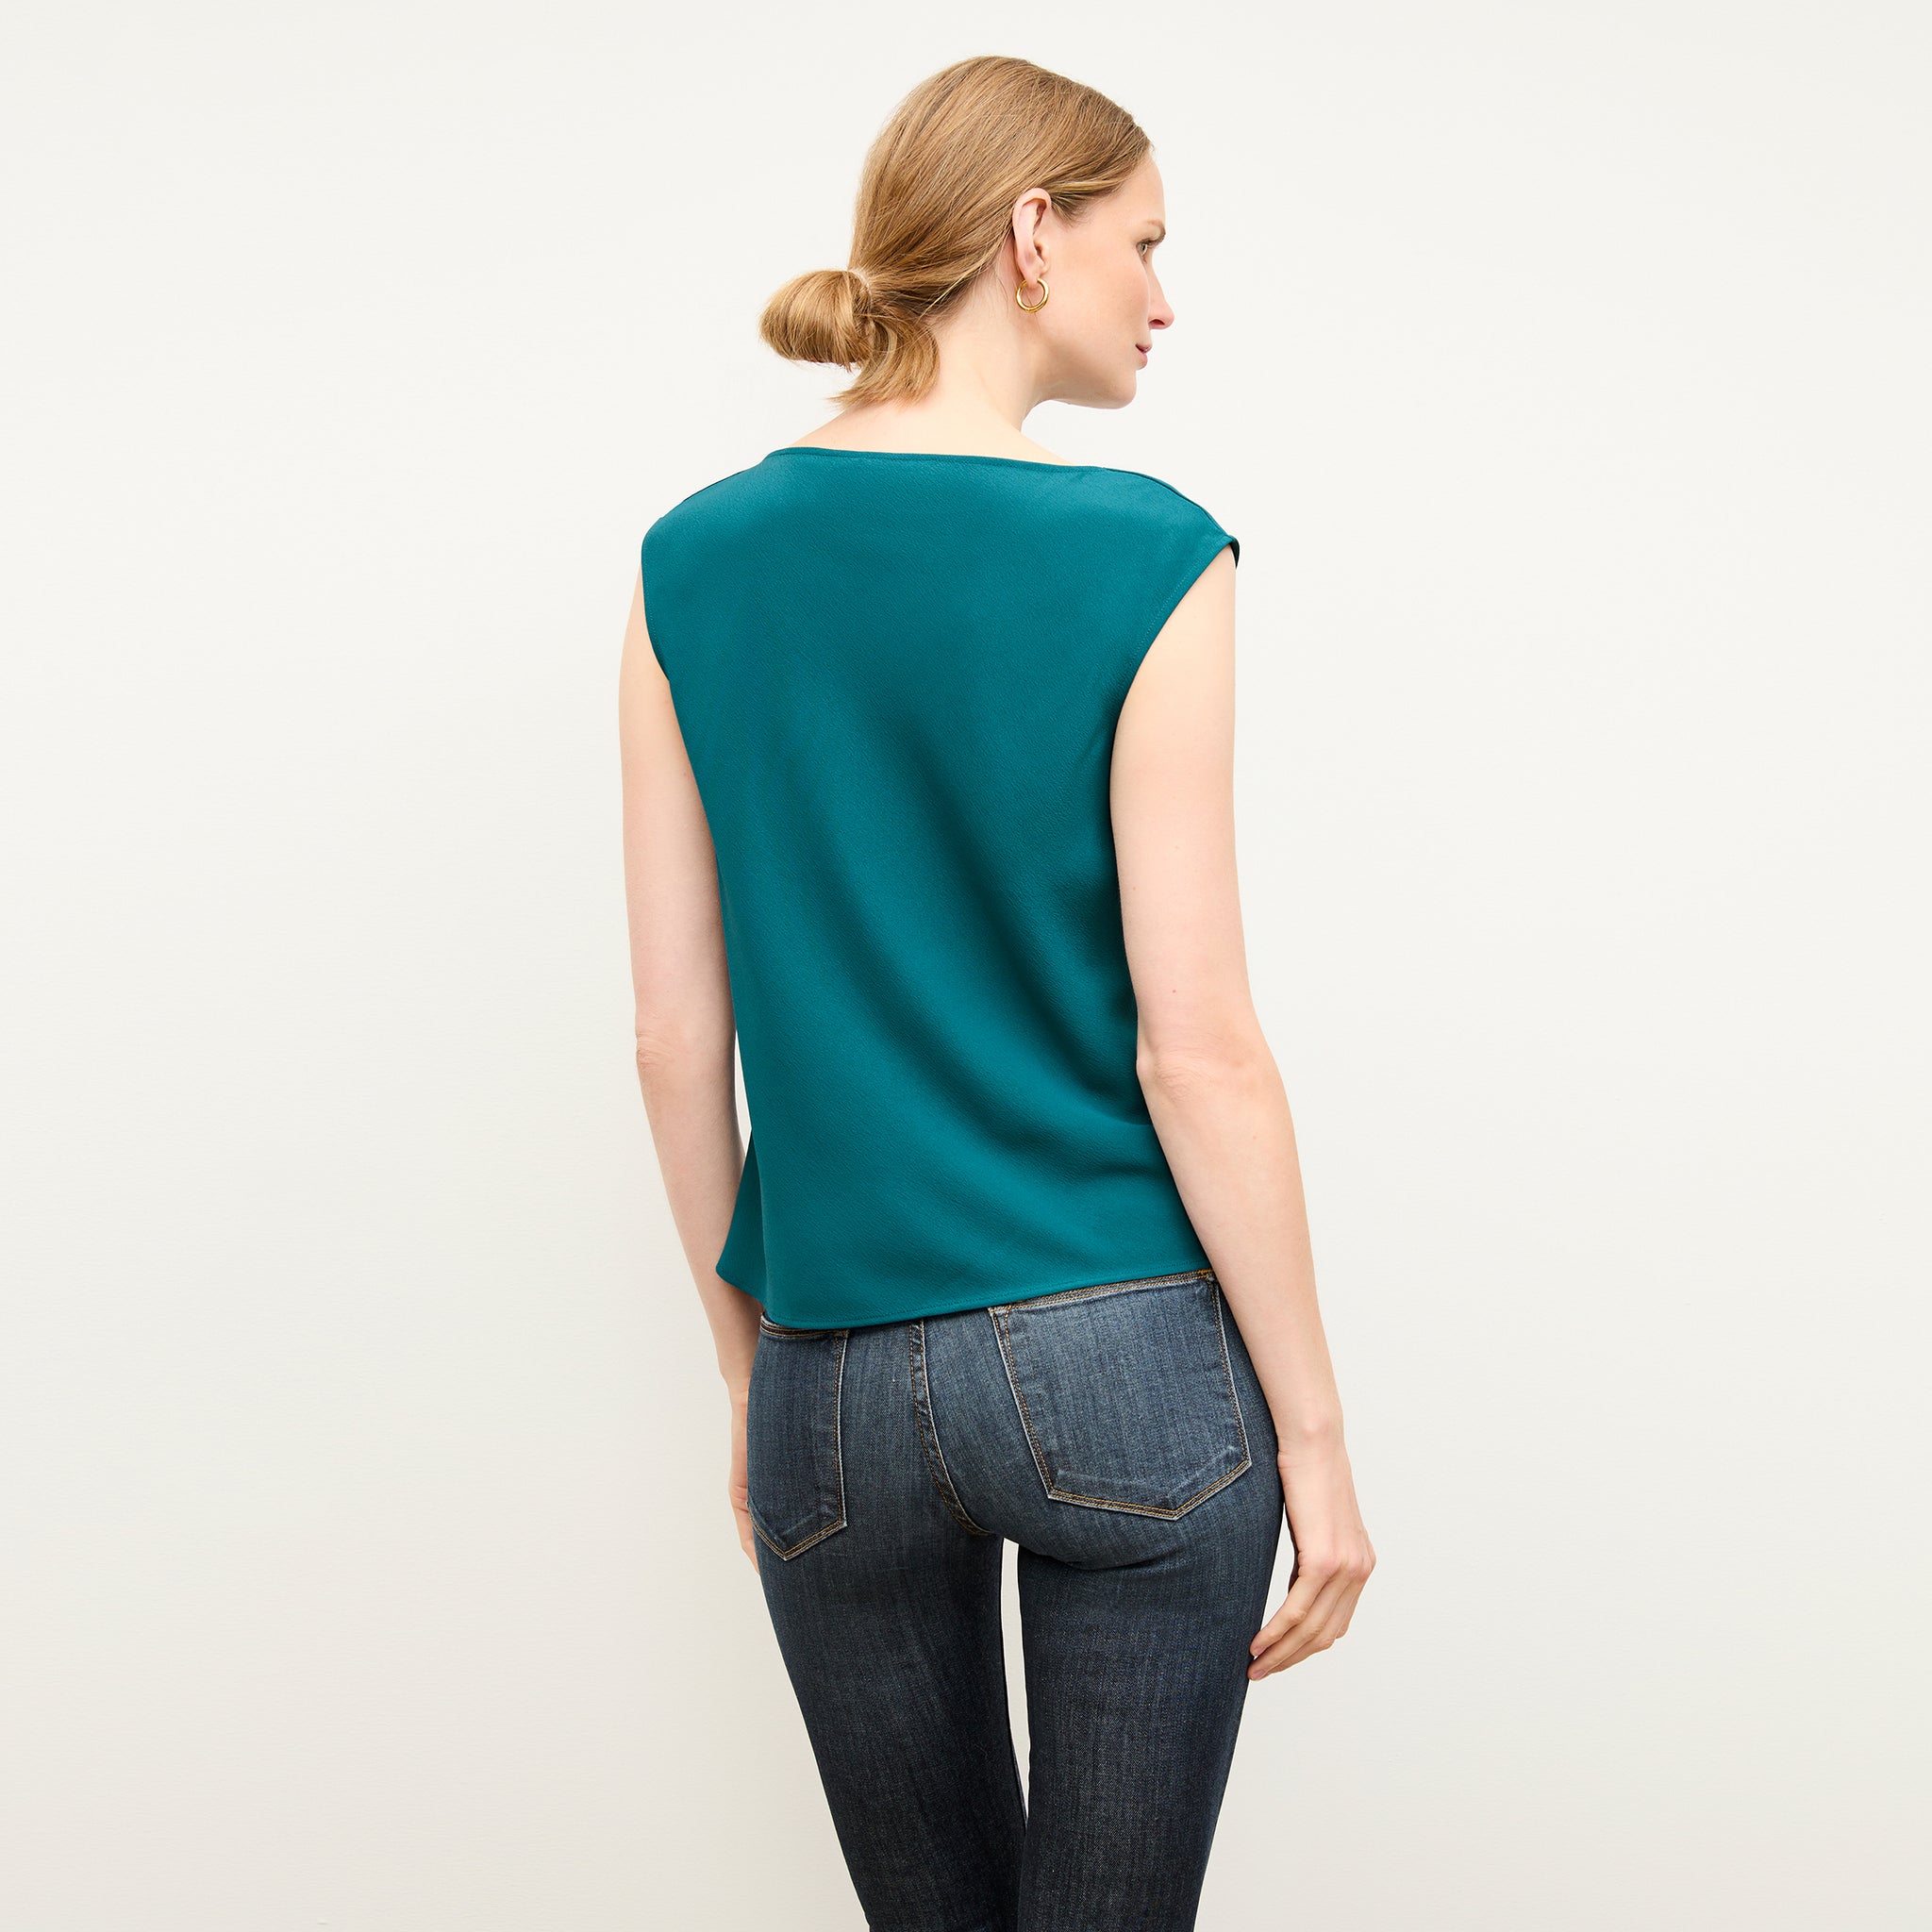 back image of a woman wearing the nora top in mineral blue